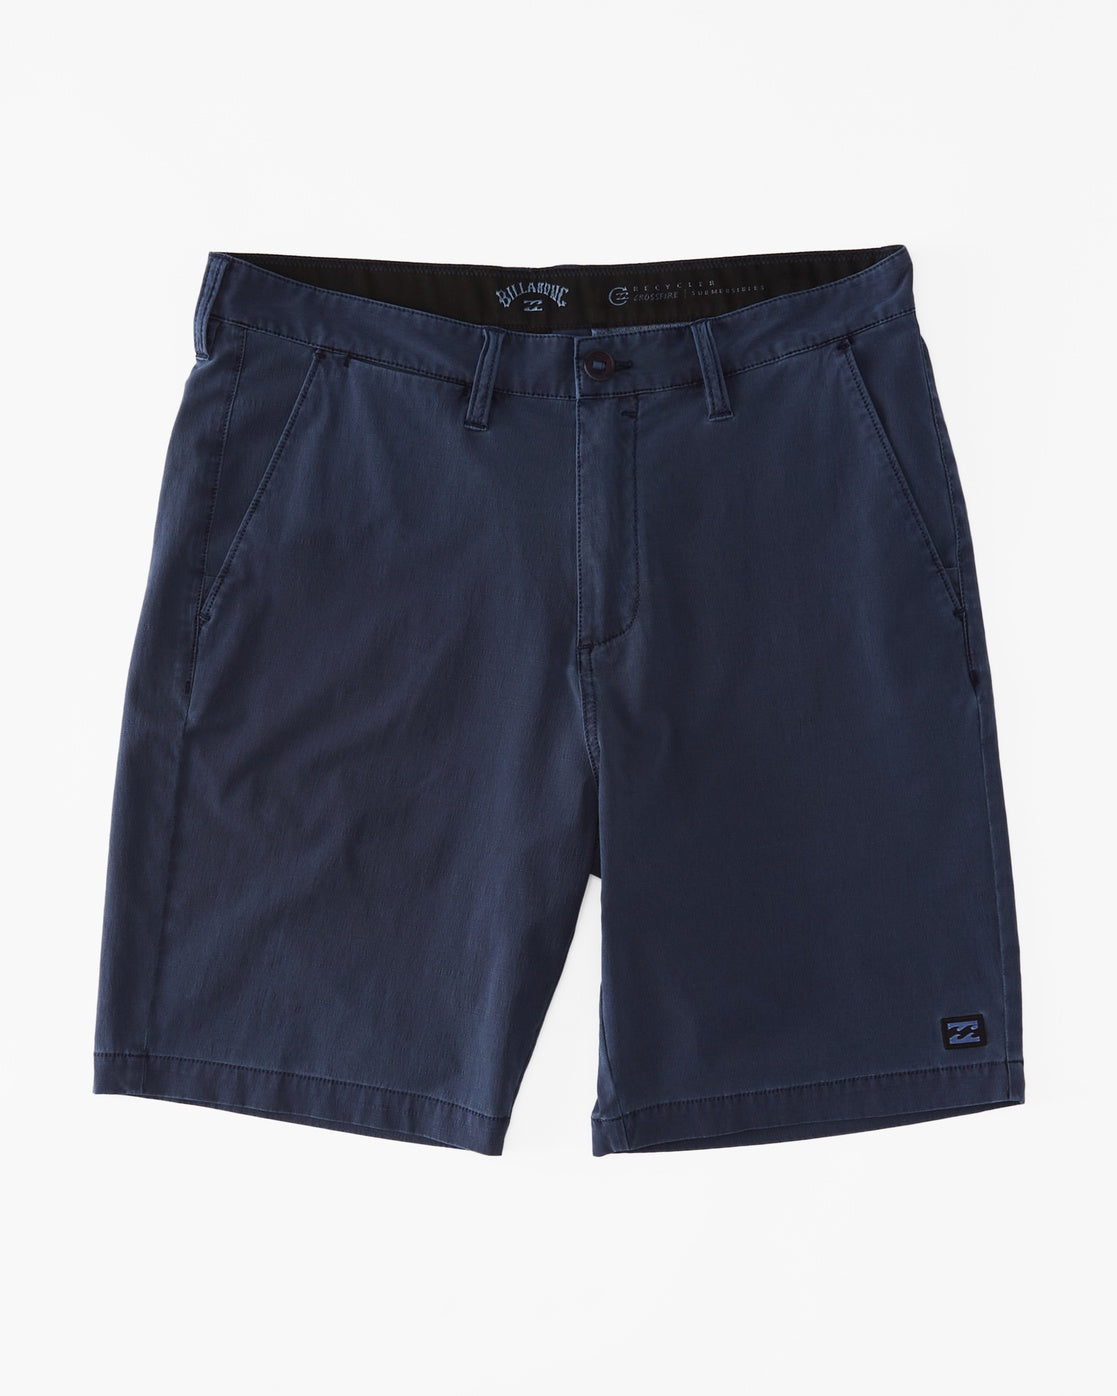 Crossfire Wave Washed 18in - Hybrid Submersible Shorts